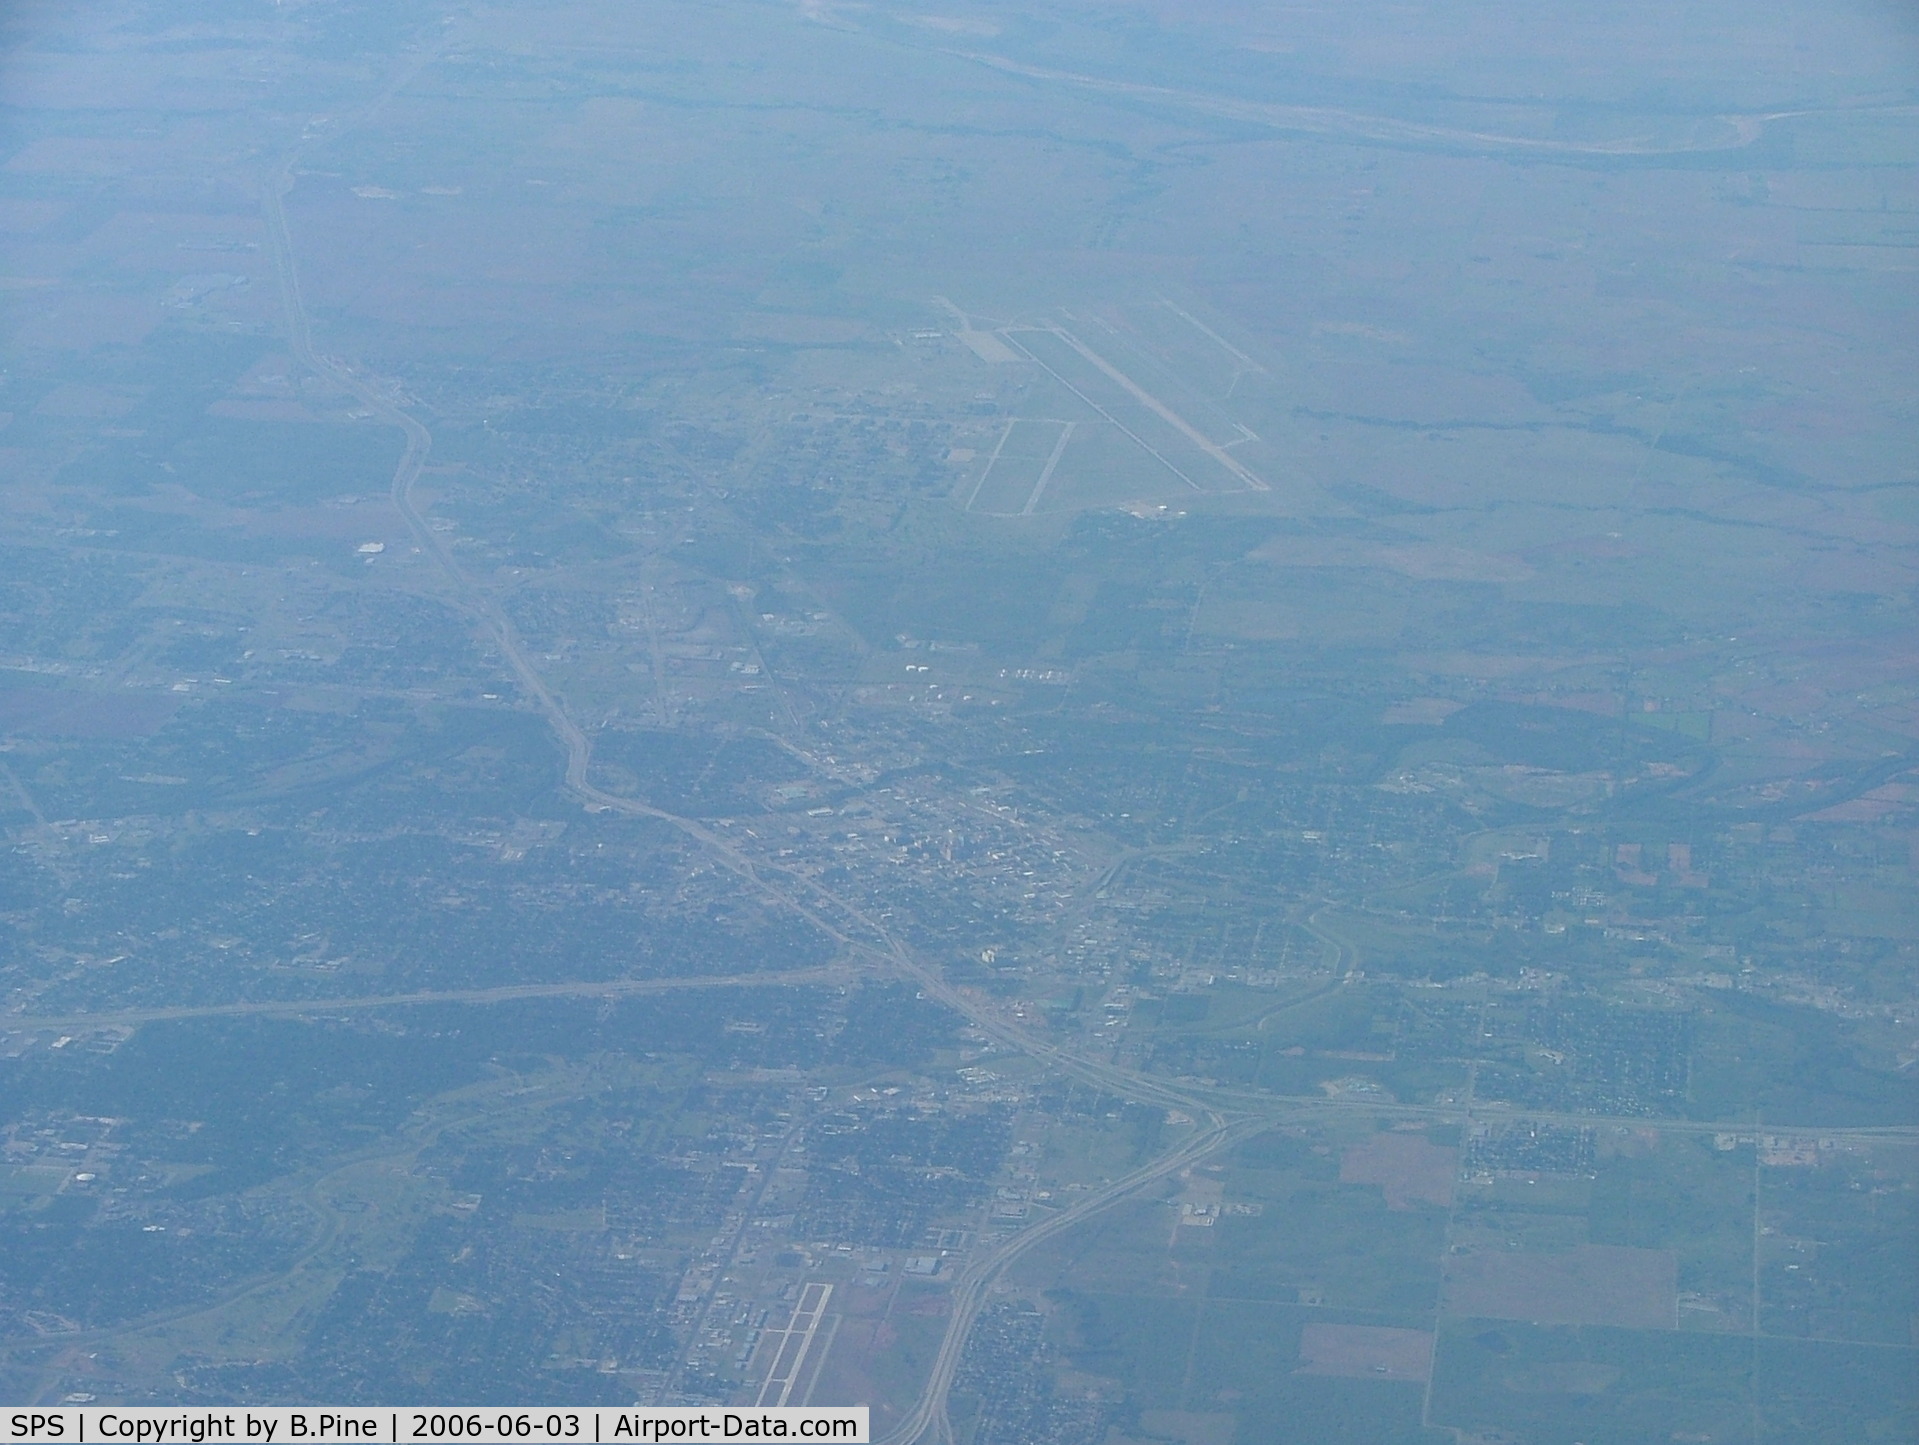 Sheppard Afb/wichita Falls Municipal Airport (SPS) - WF Airport, notice Kickapoo Airport to the south